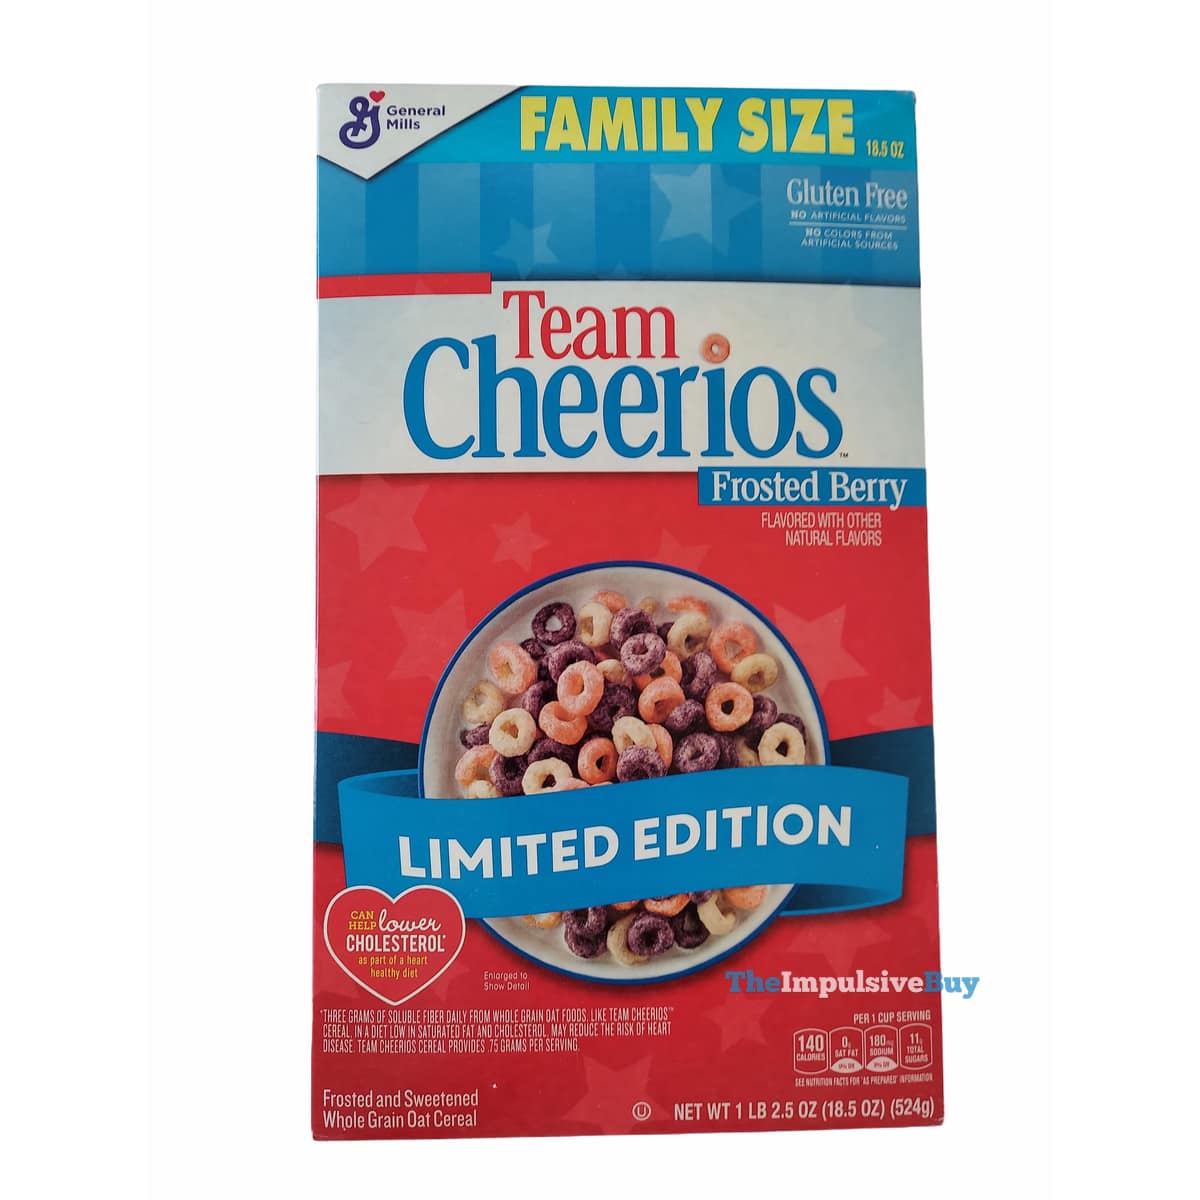 Cheerios, Frosted Cheerios & Honey Nut Cheerios Cereal Review 